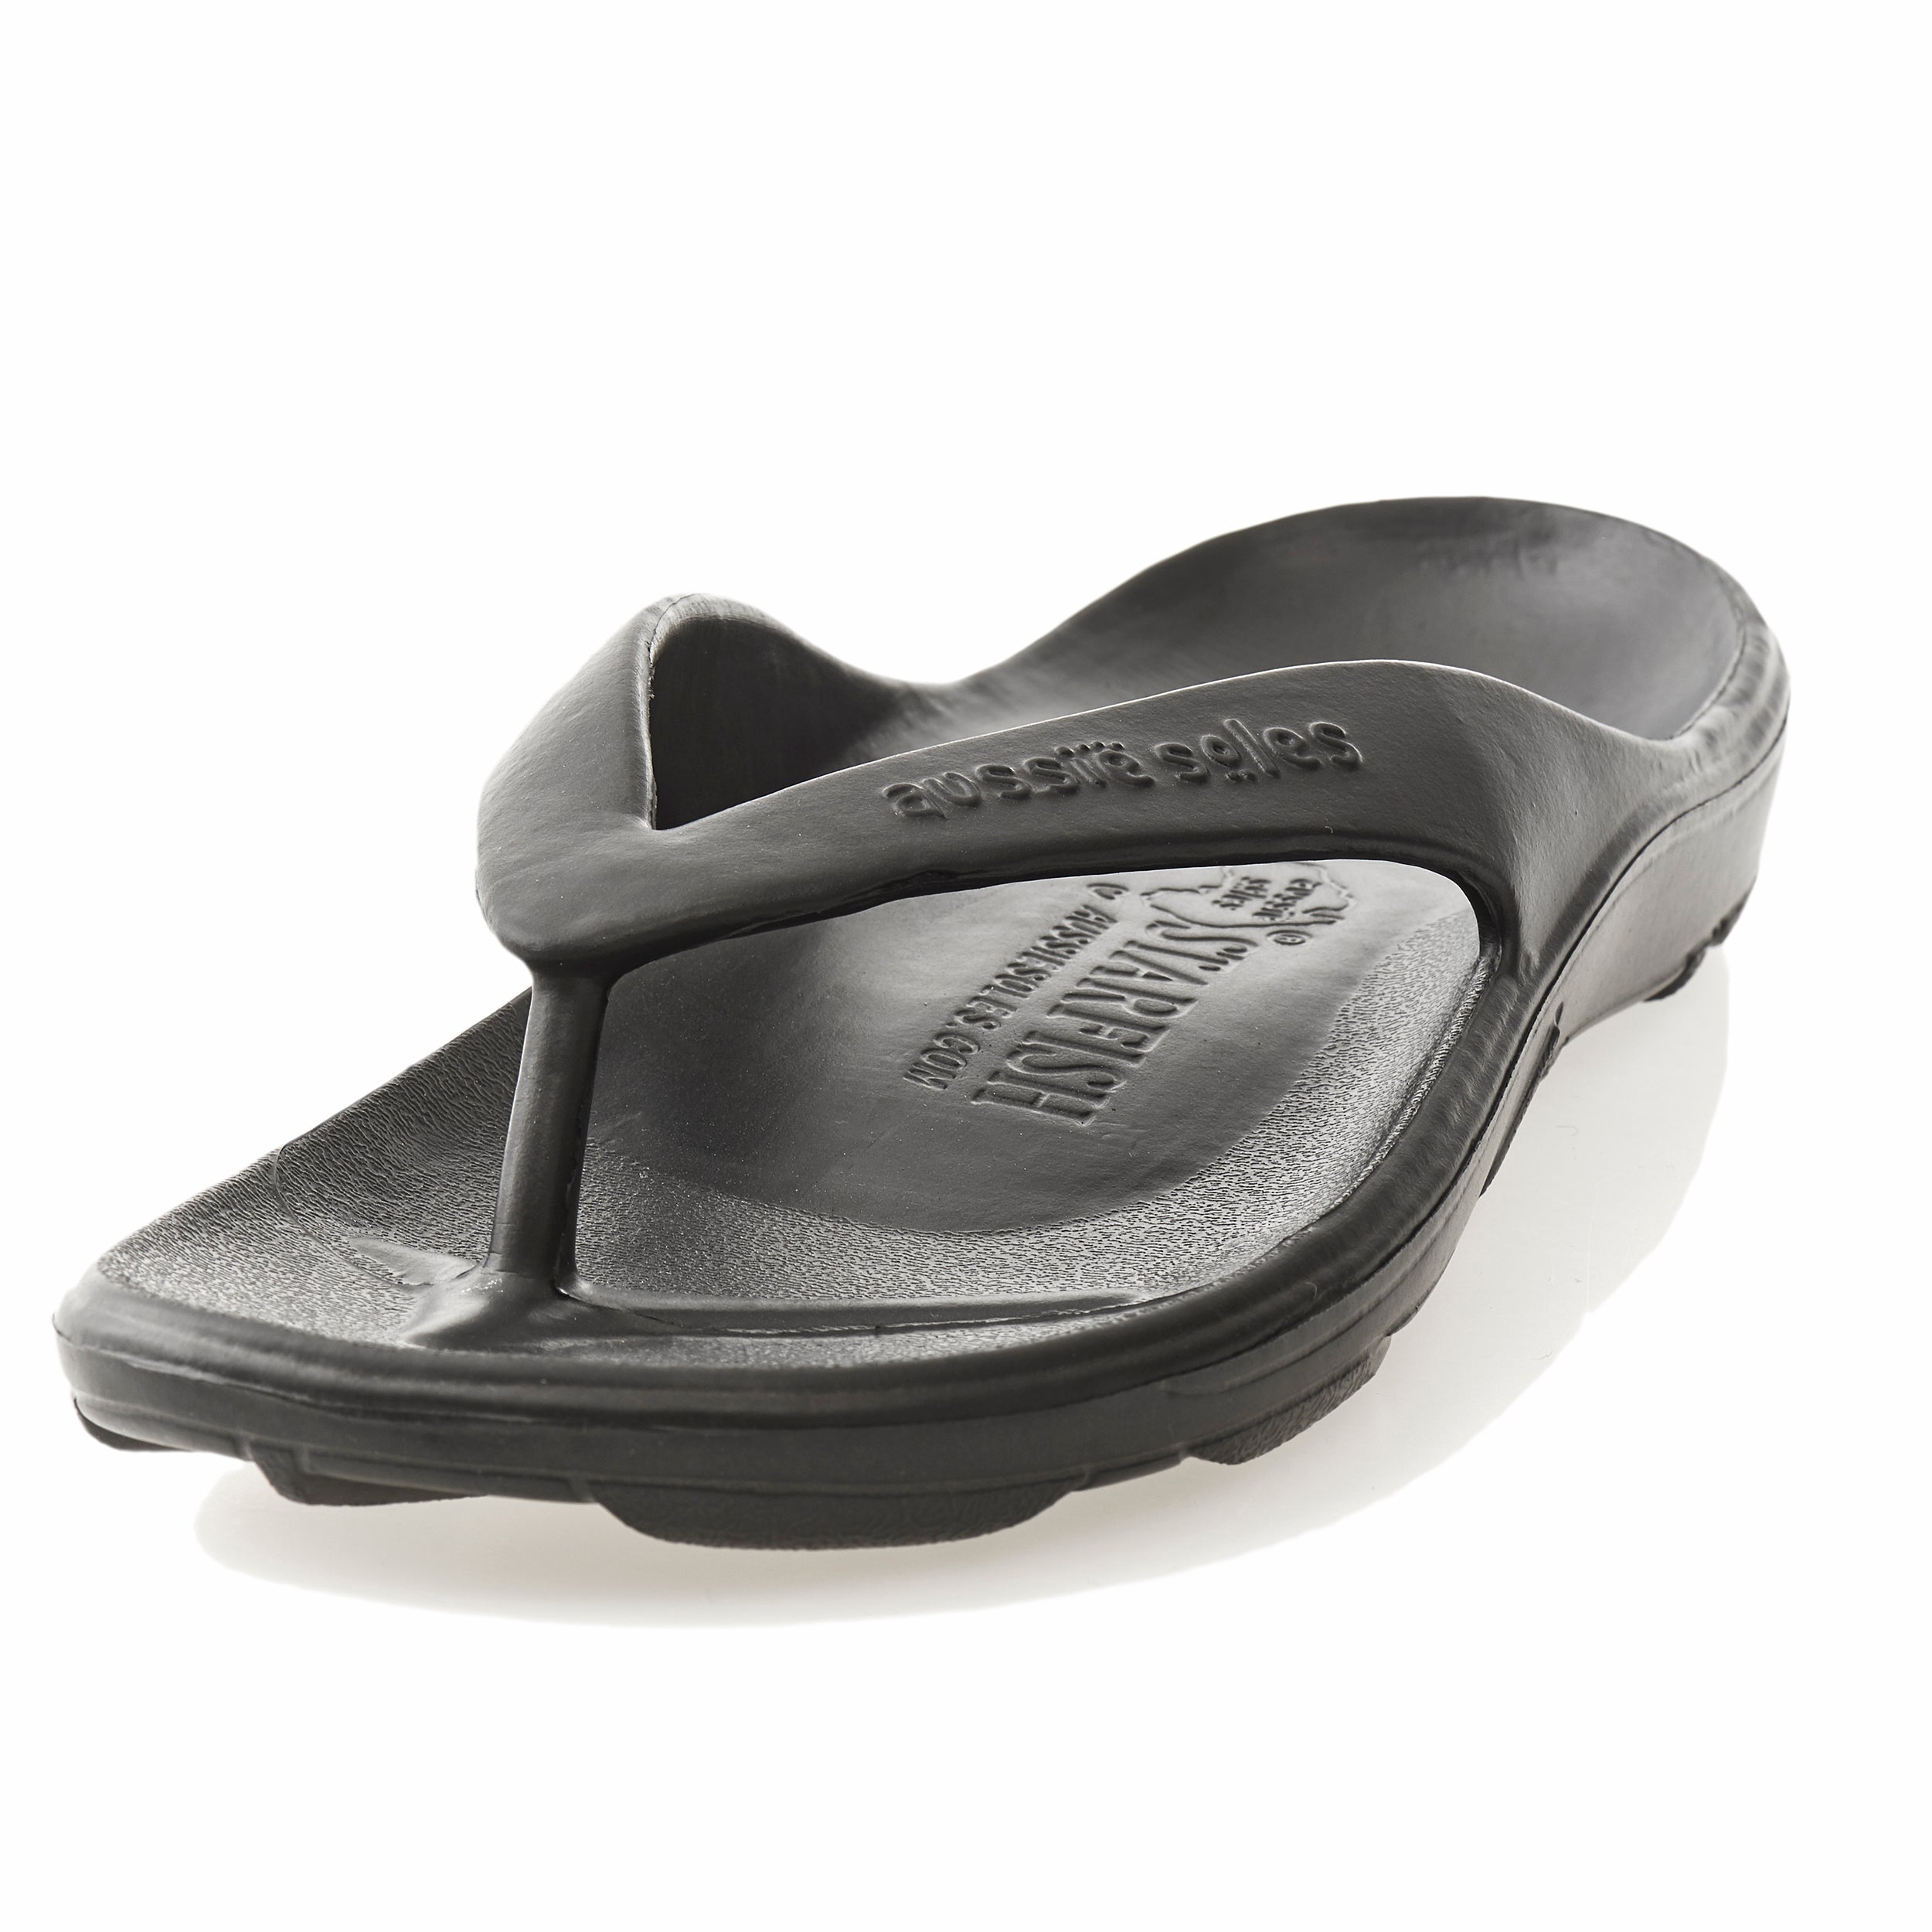 black flip flops with arch support